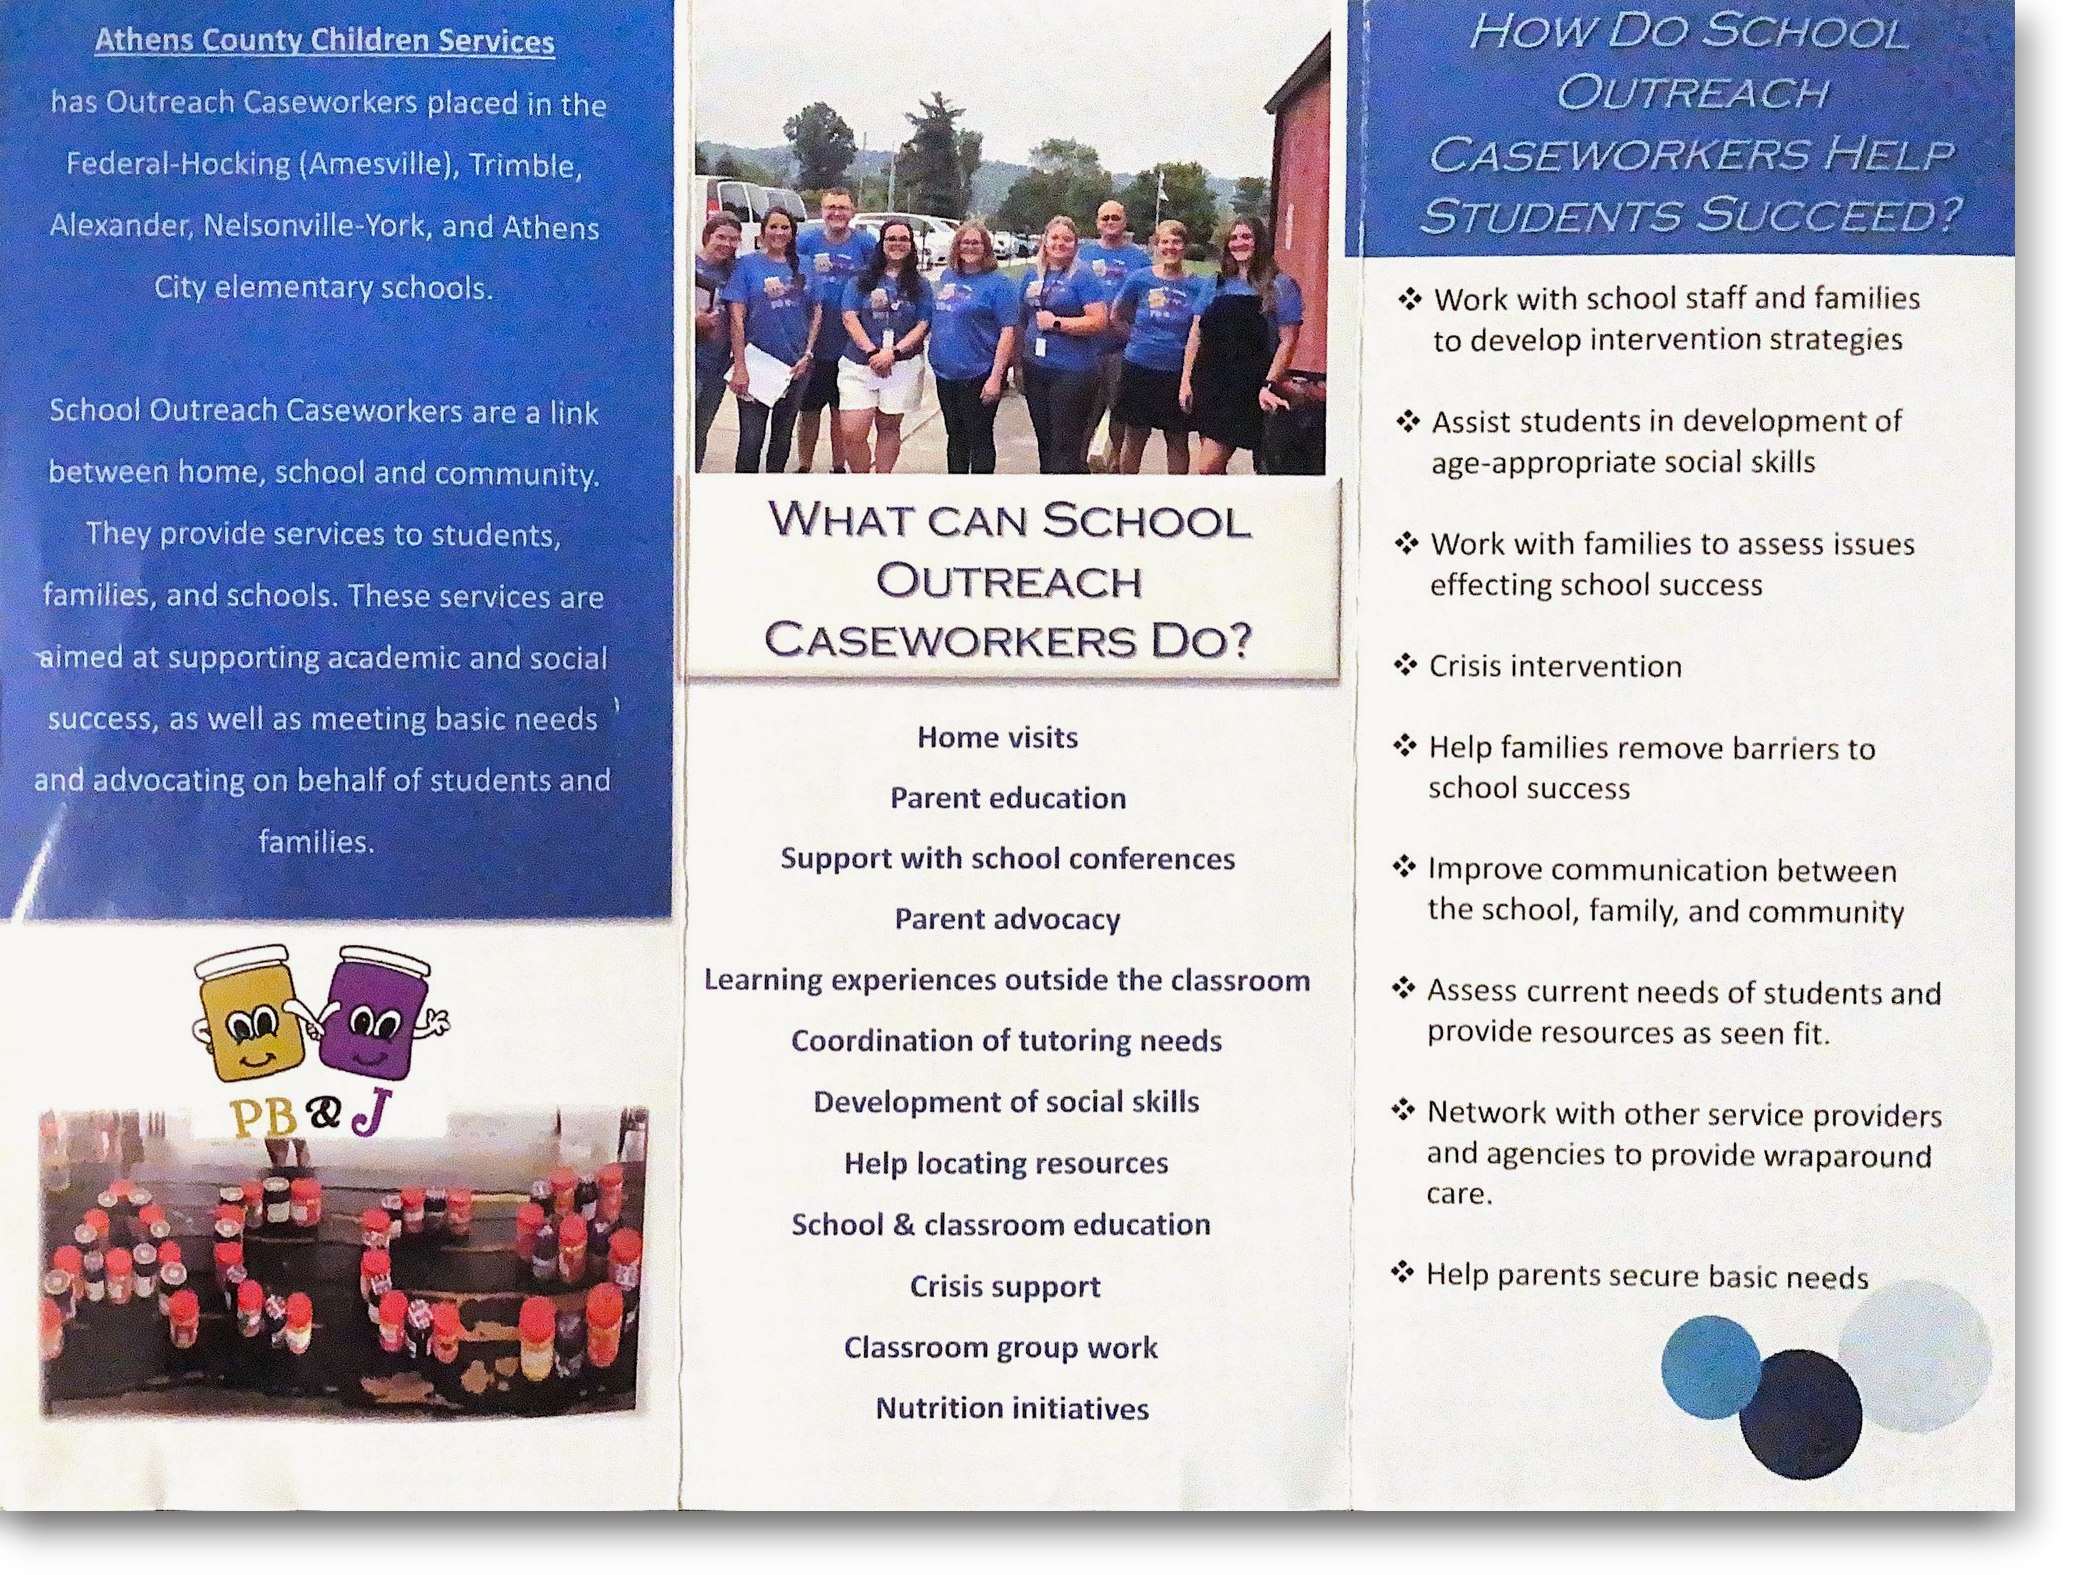 The brochure for the Athens County Children Services School Outreach Program